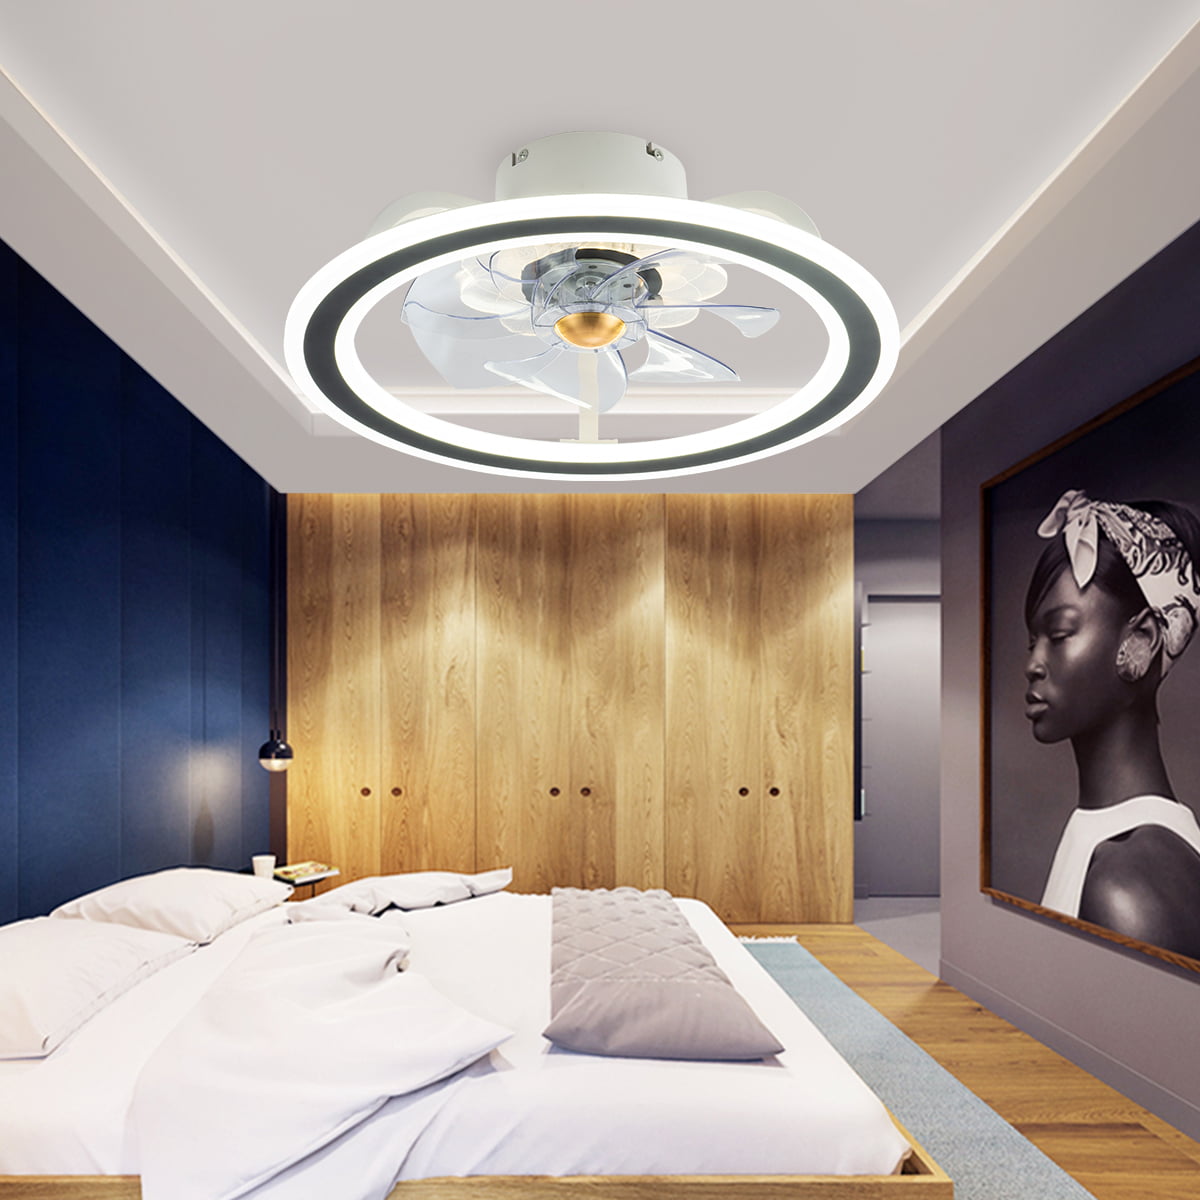 Indoor Ceiling Fan with Lights and Remote Control Dimmable 3 Color 3 Speeds Timing Semi Flush Mount Low Profile Fan for Kids Room Bedroom Living Room Modern Bladeless Ceiling Fan Light